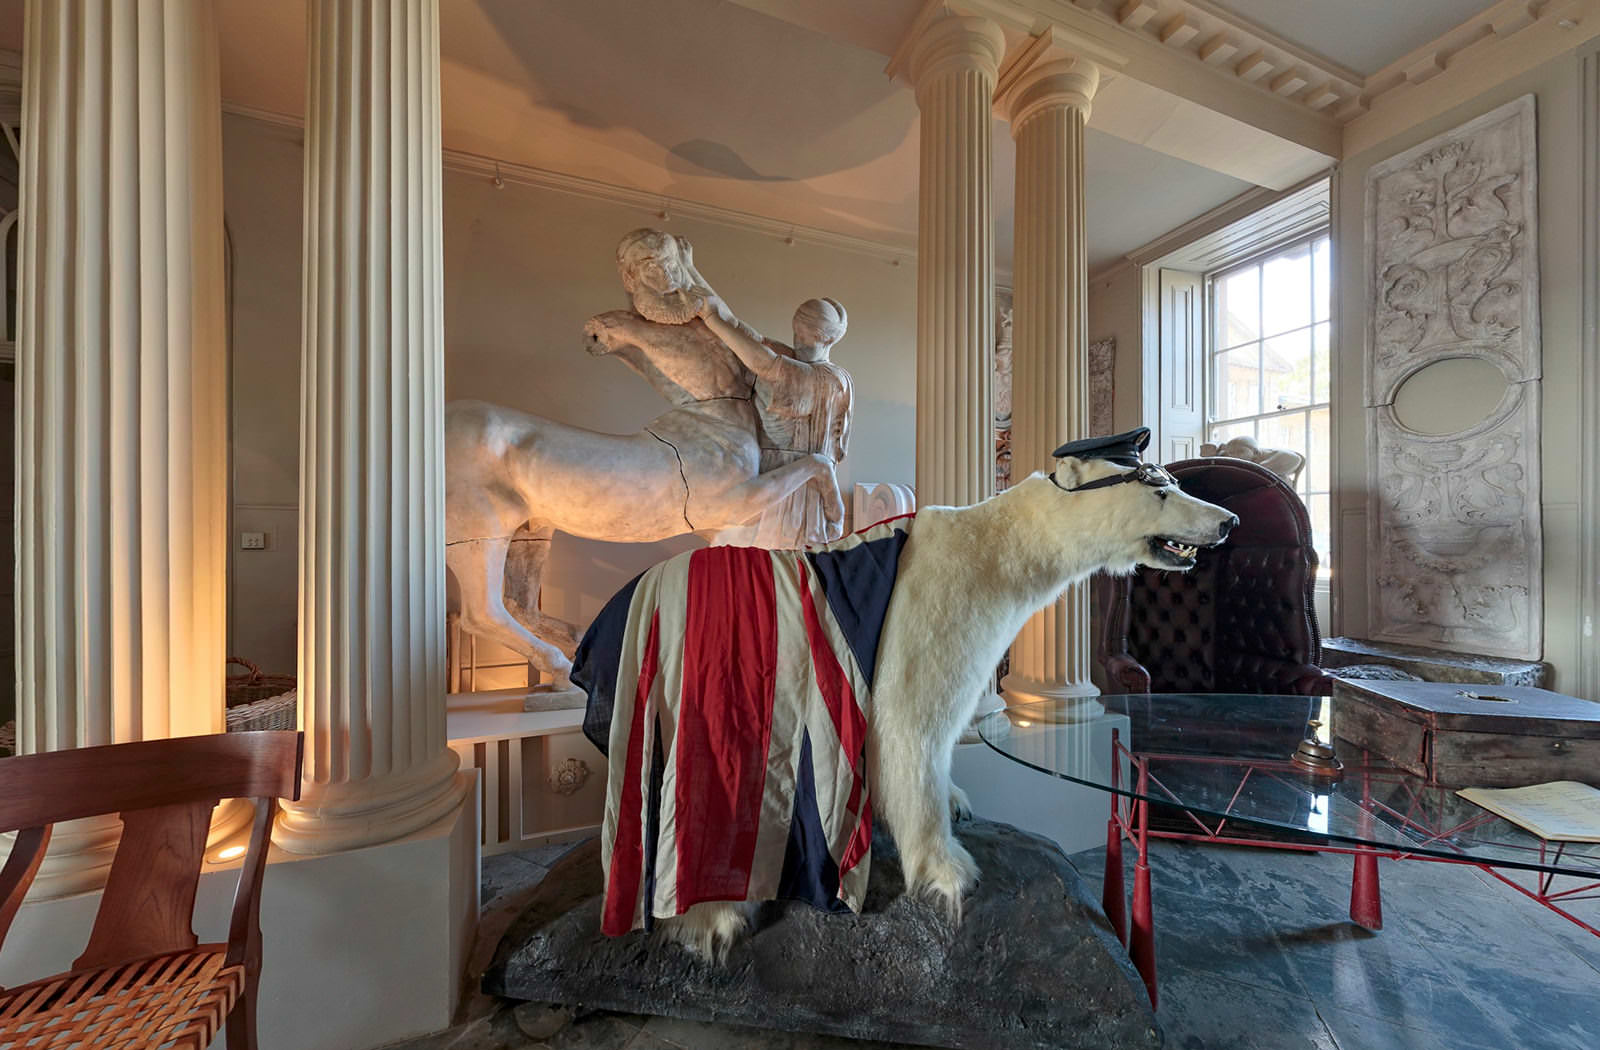 Aynhoe Park - still of the polar bear in the lobby from the virtual tour